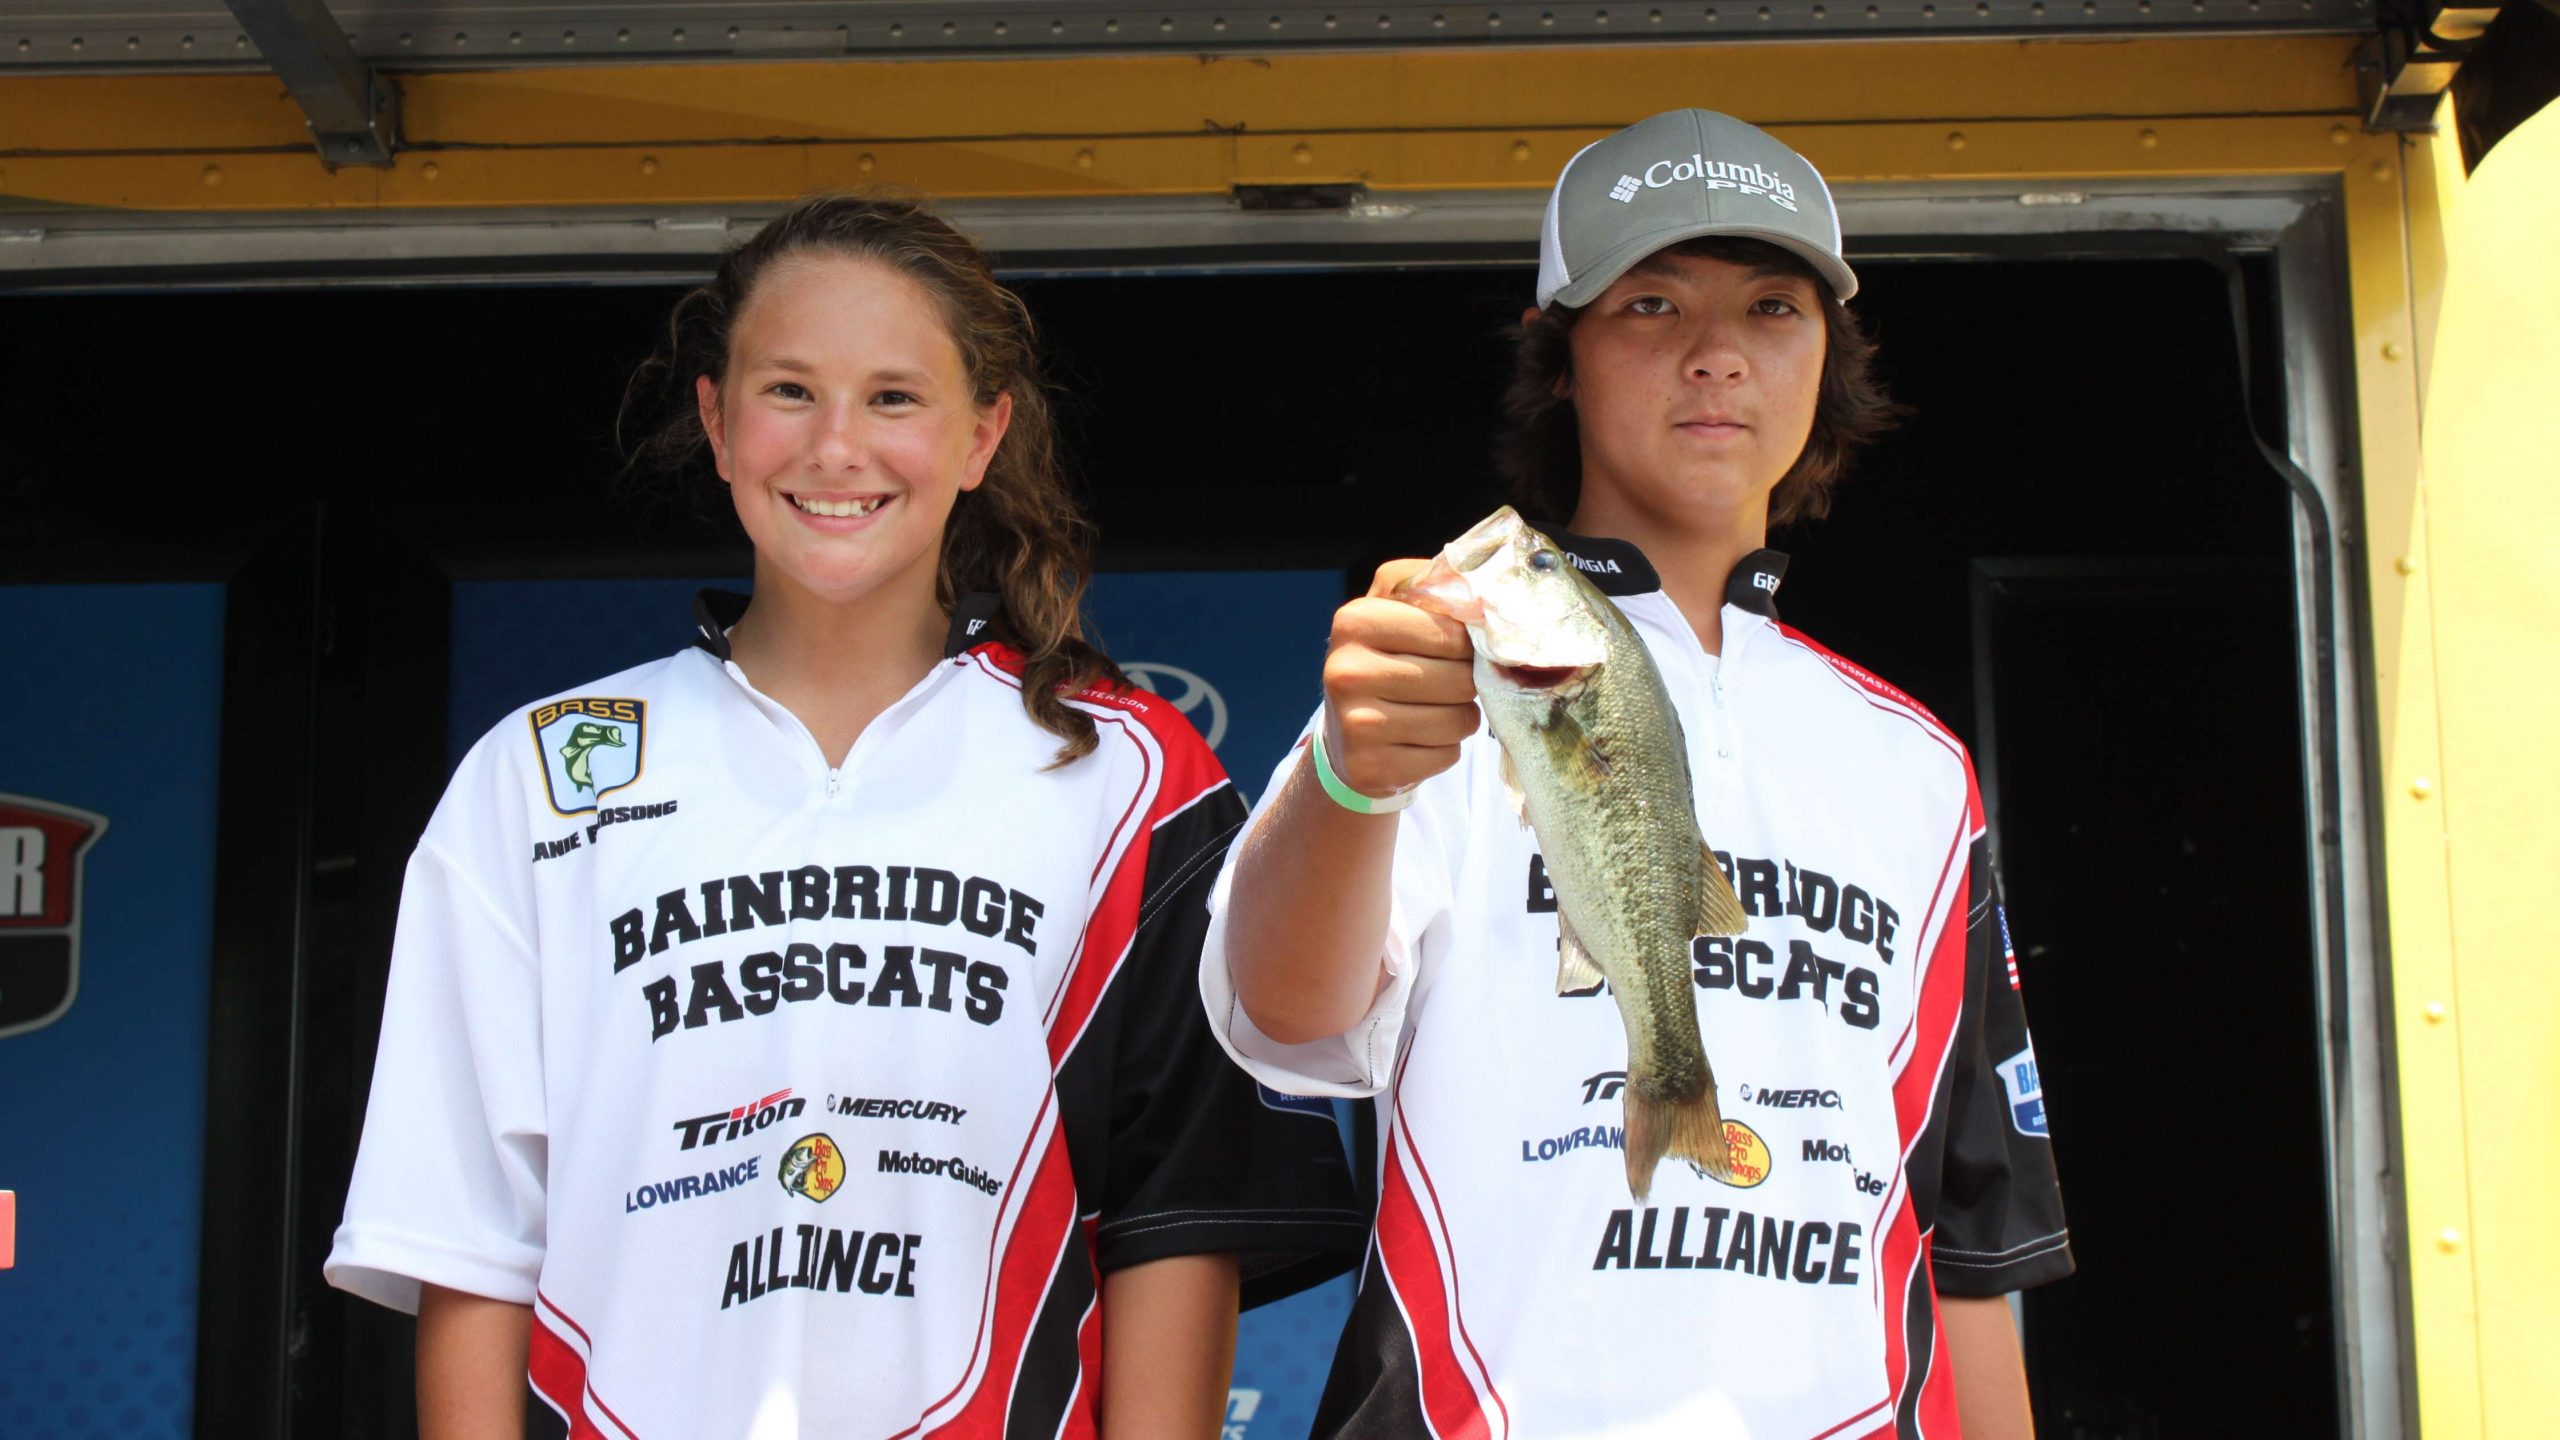 Lanie Birdsong and Hunter Davis of Team Georgia finished 29th with a 1-4 total.